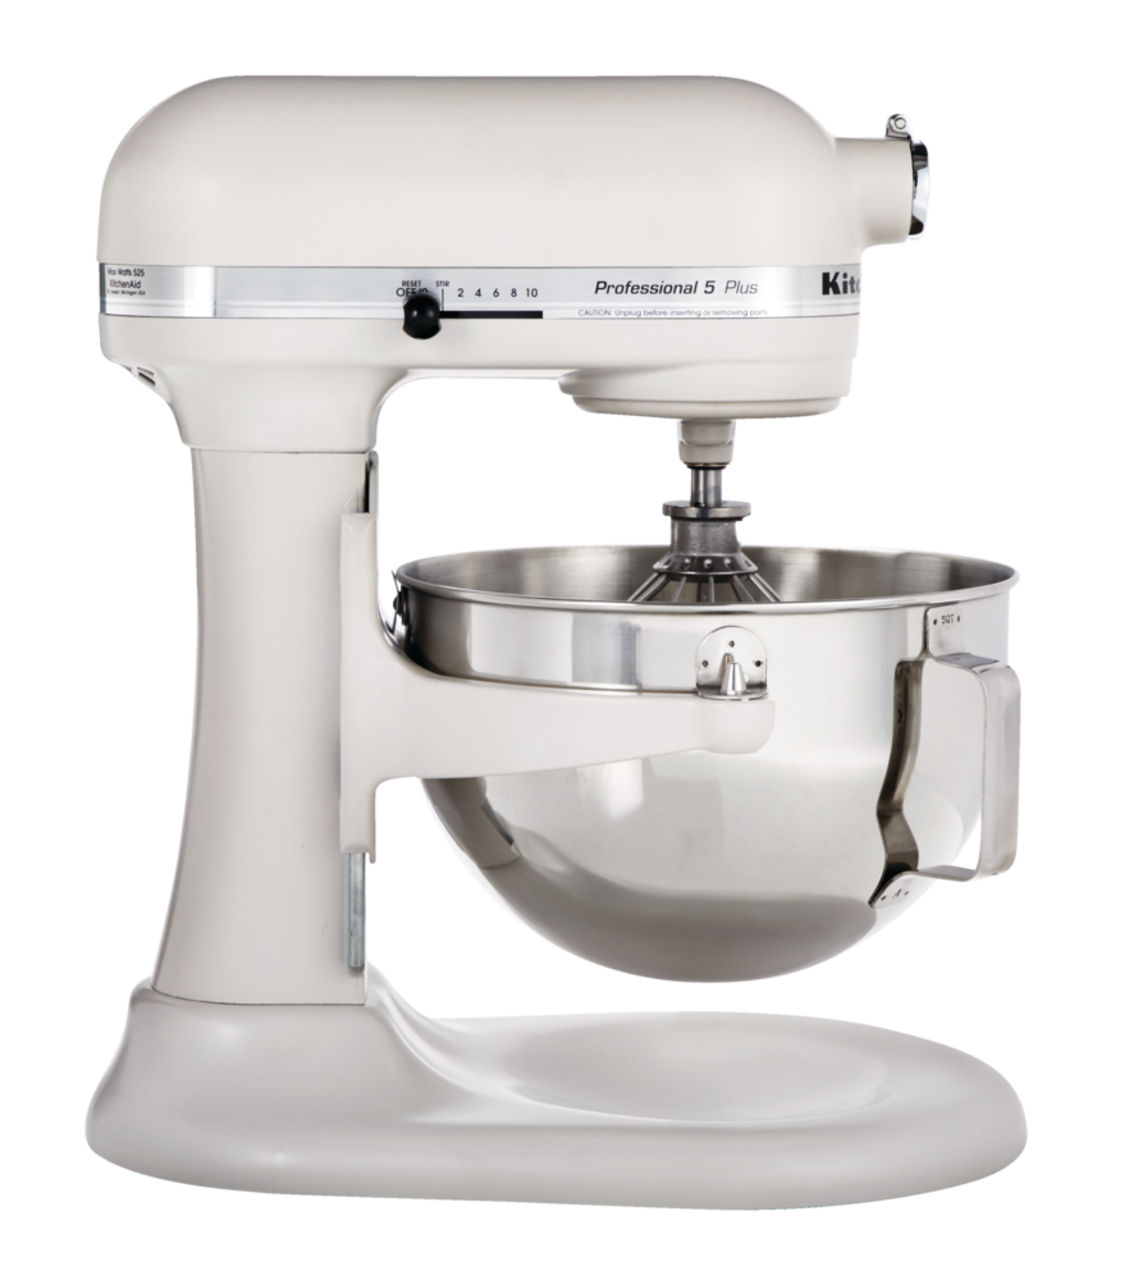 https://media-www.canadiantire.ca/product/living/kitchen/kitchen-appliances/0437313/kitchen-aid-pro-5-stand-mixer-milkshake-db4fe083-d770-4975-9267-b8c9e56298ba.png?imdensity=1&imwidth=640&impolicy=mZoom